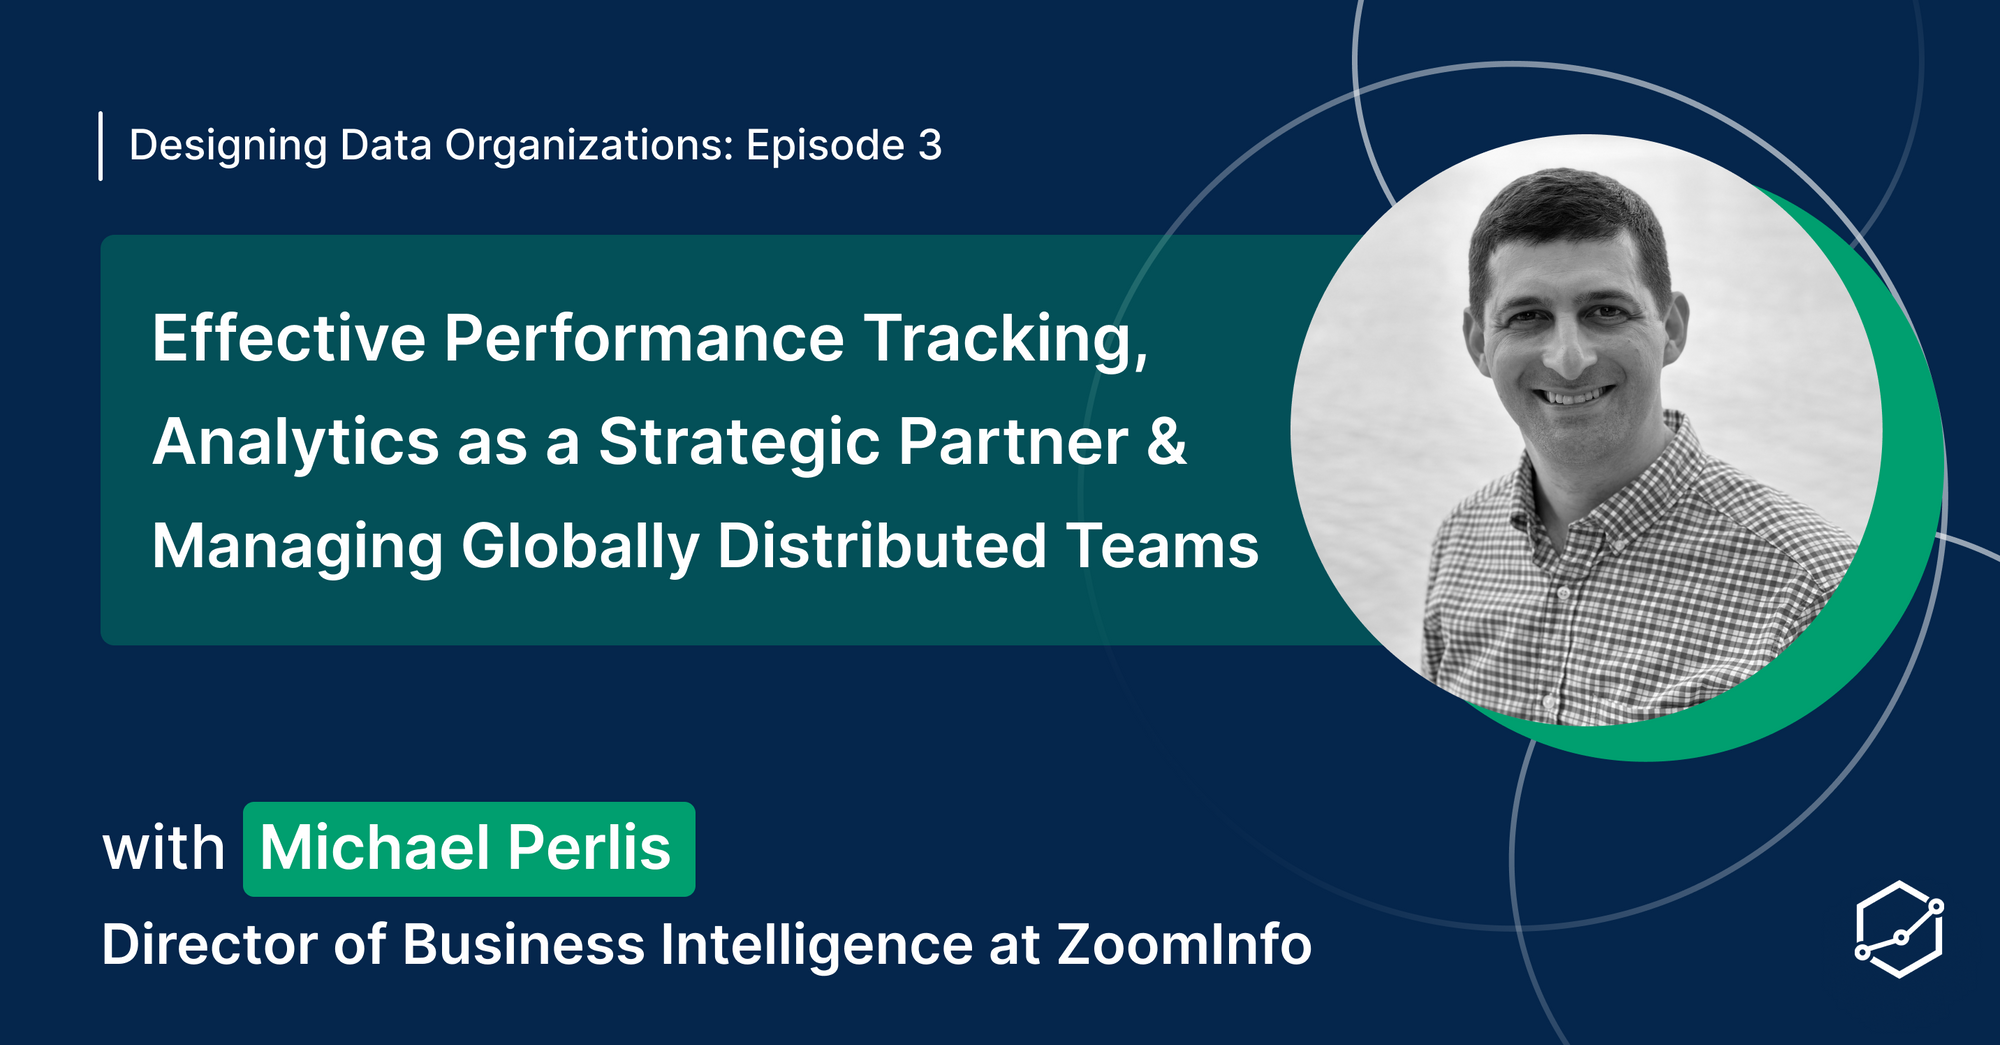 Effective Performance Tracking,  Analytics as a Strategic Partner, and  Managing Globally Distributed Teams at ZoomInfo: An Interview with Michael Perlis